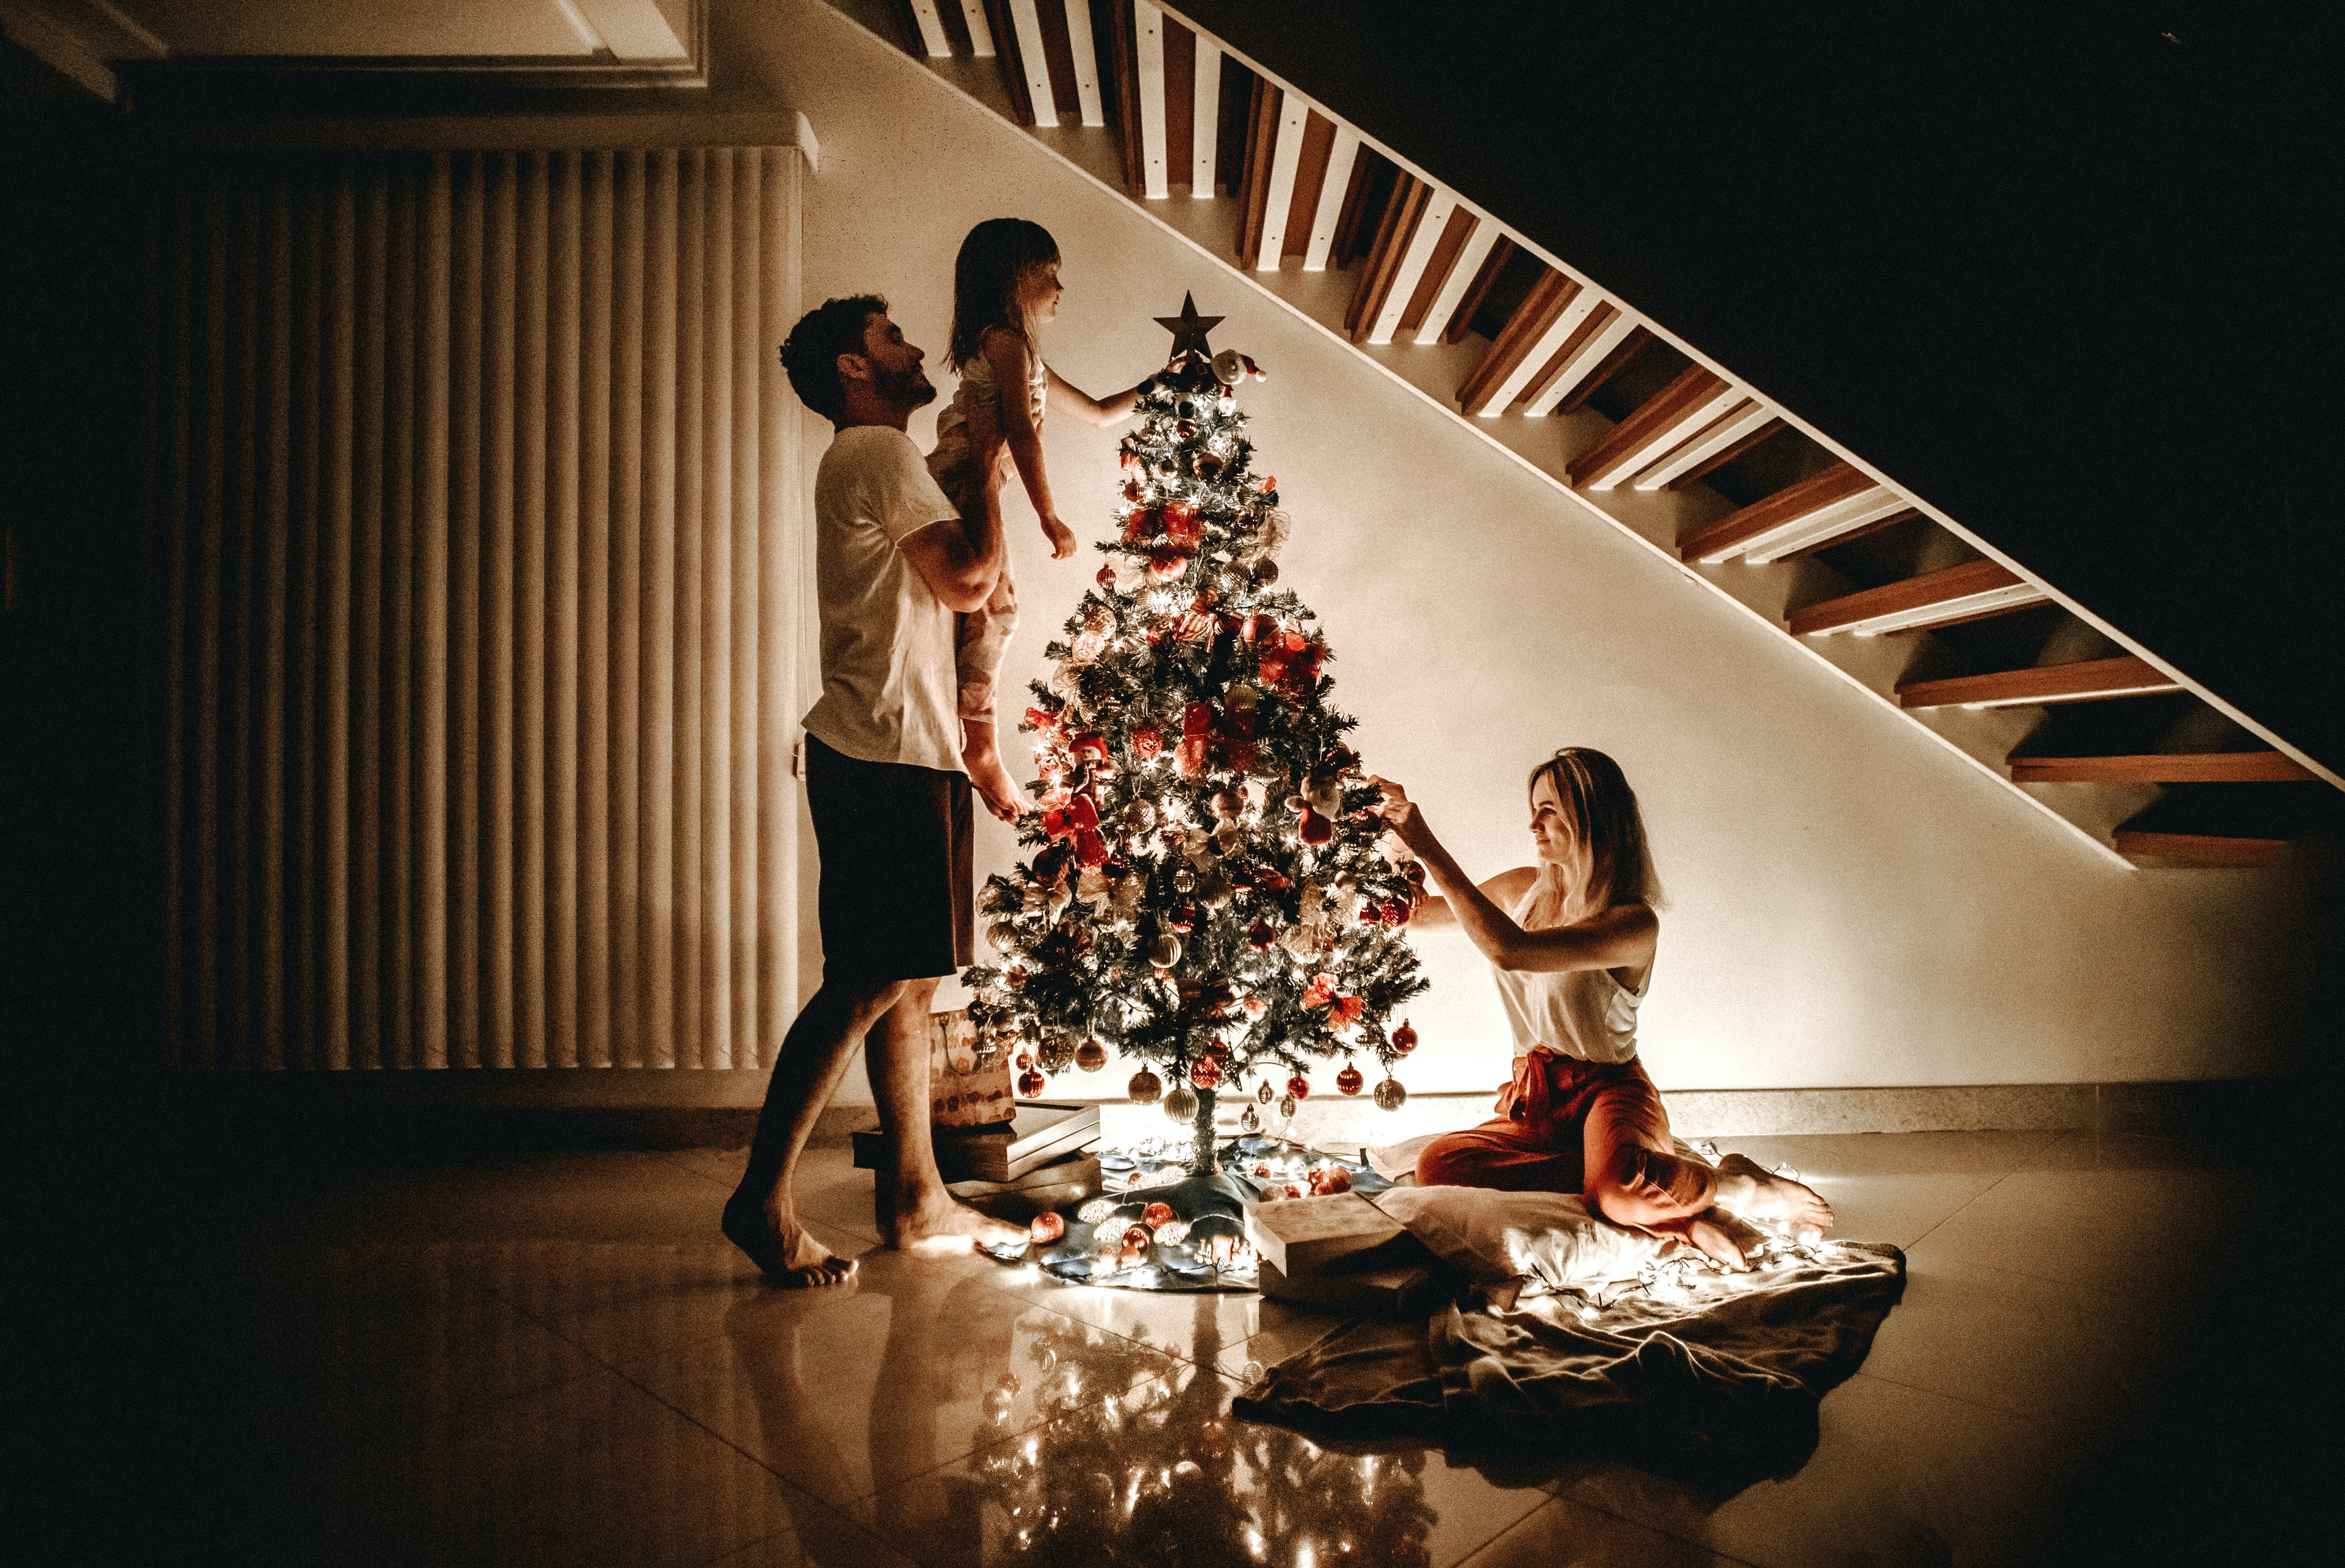 Sell your home before Christmas?